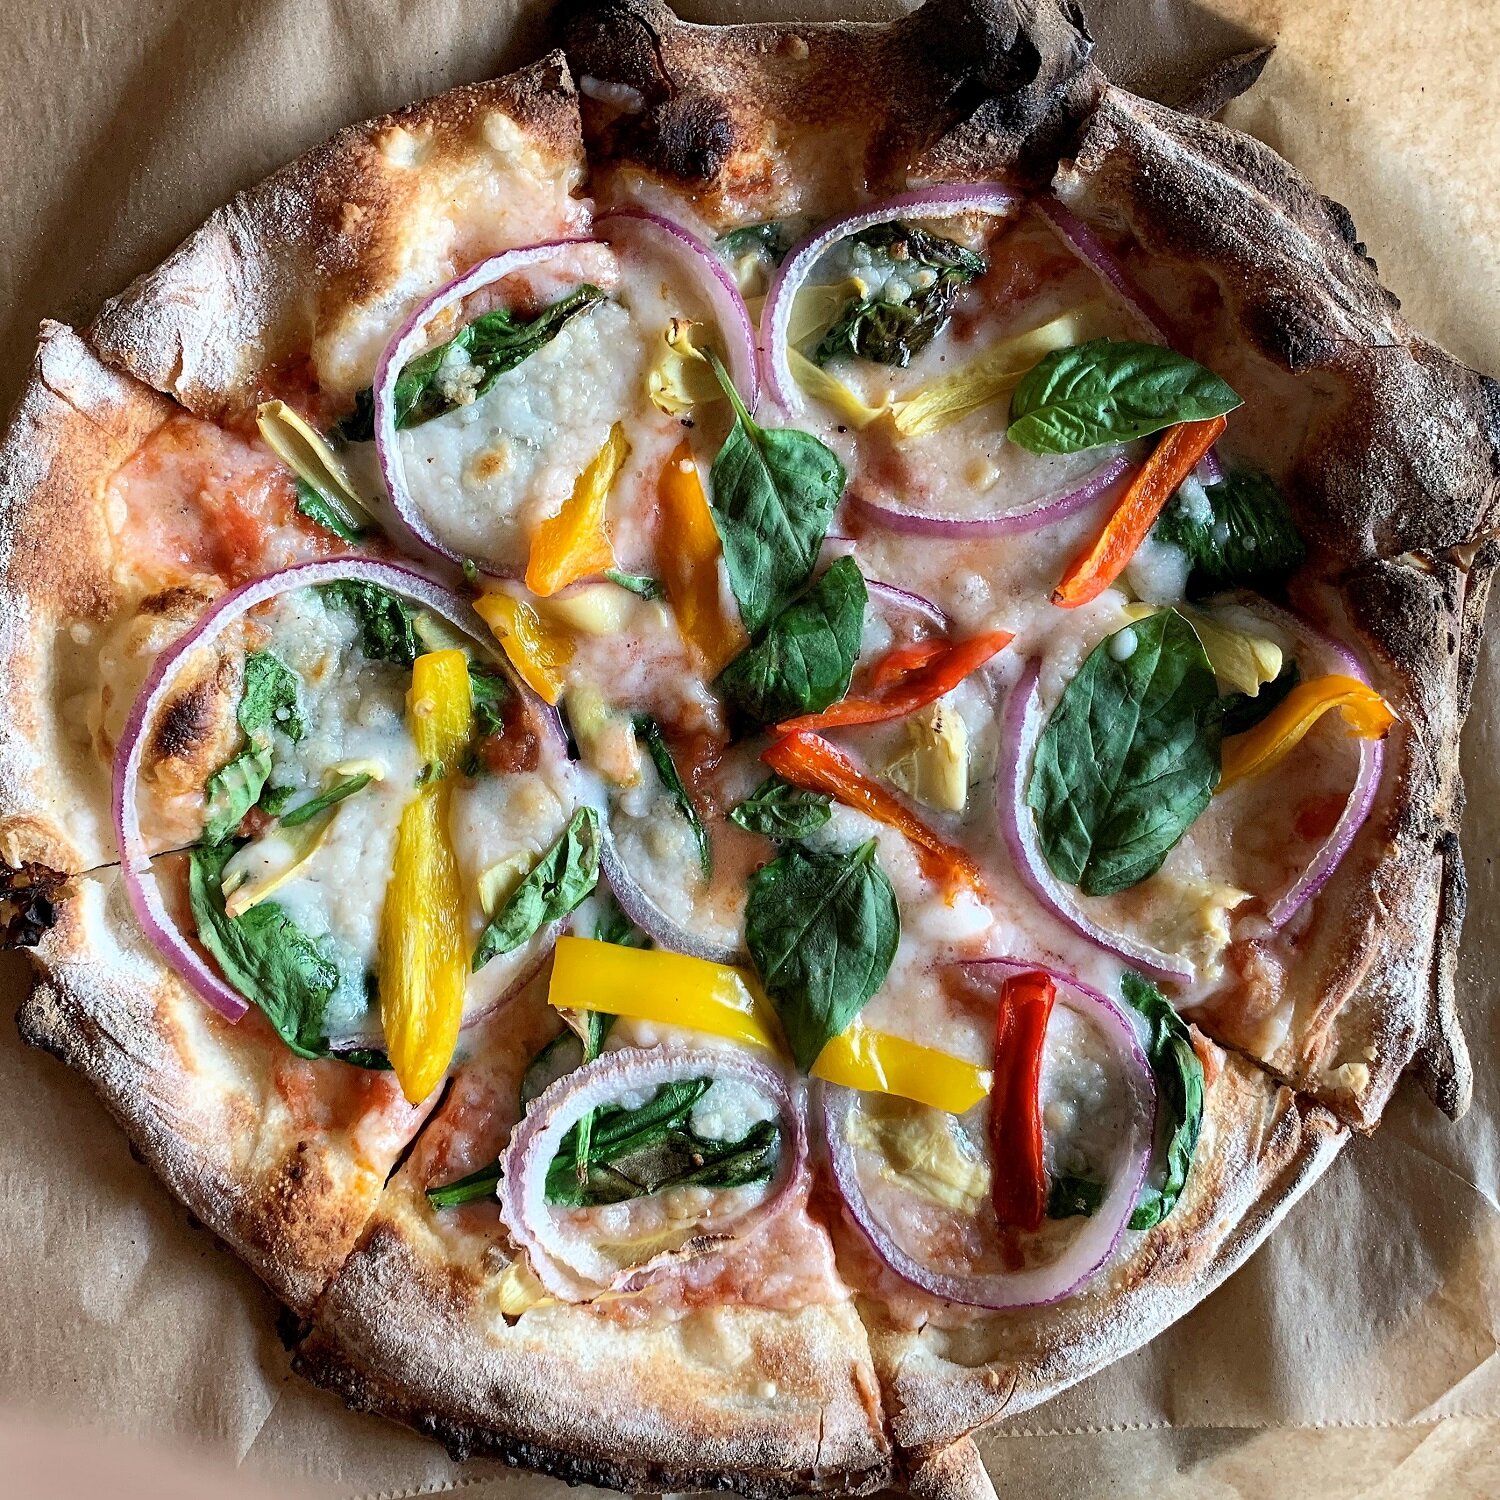 A thin crust pizza with vegan cheese, peppers, spinach, and red onions